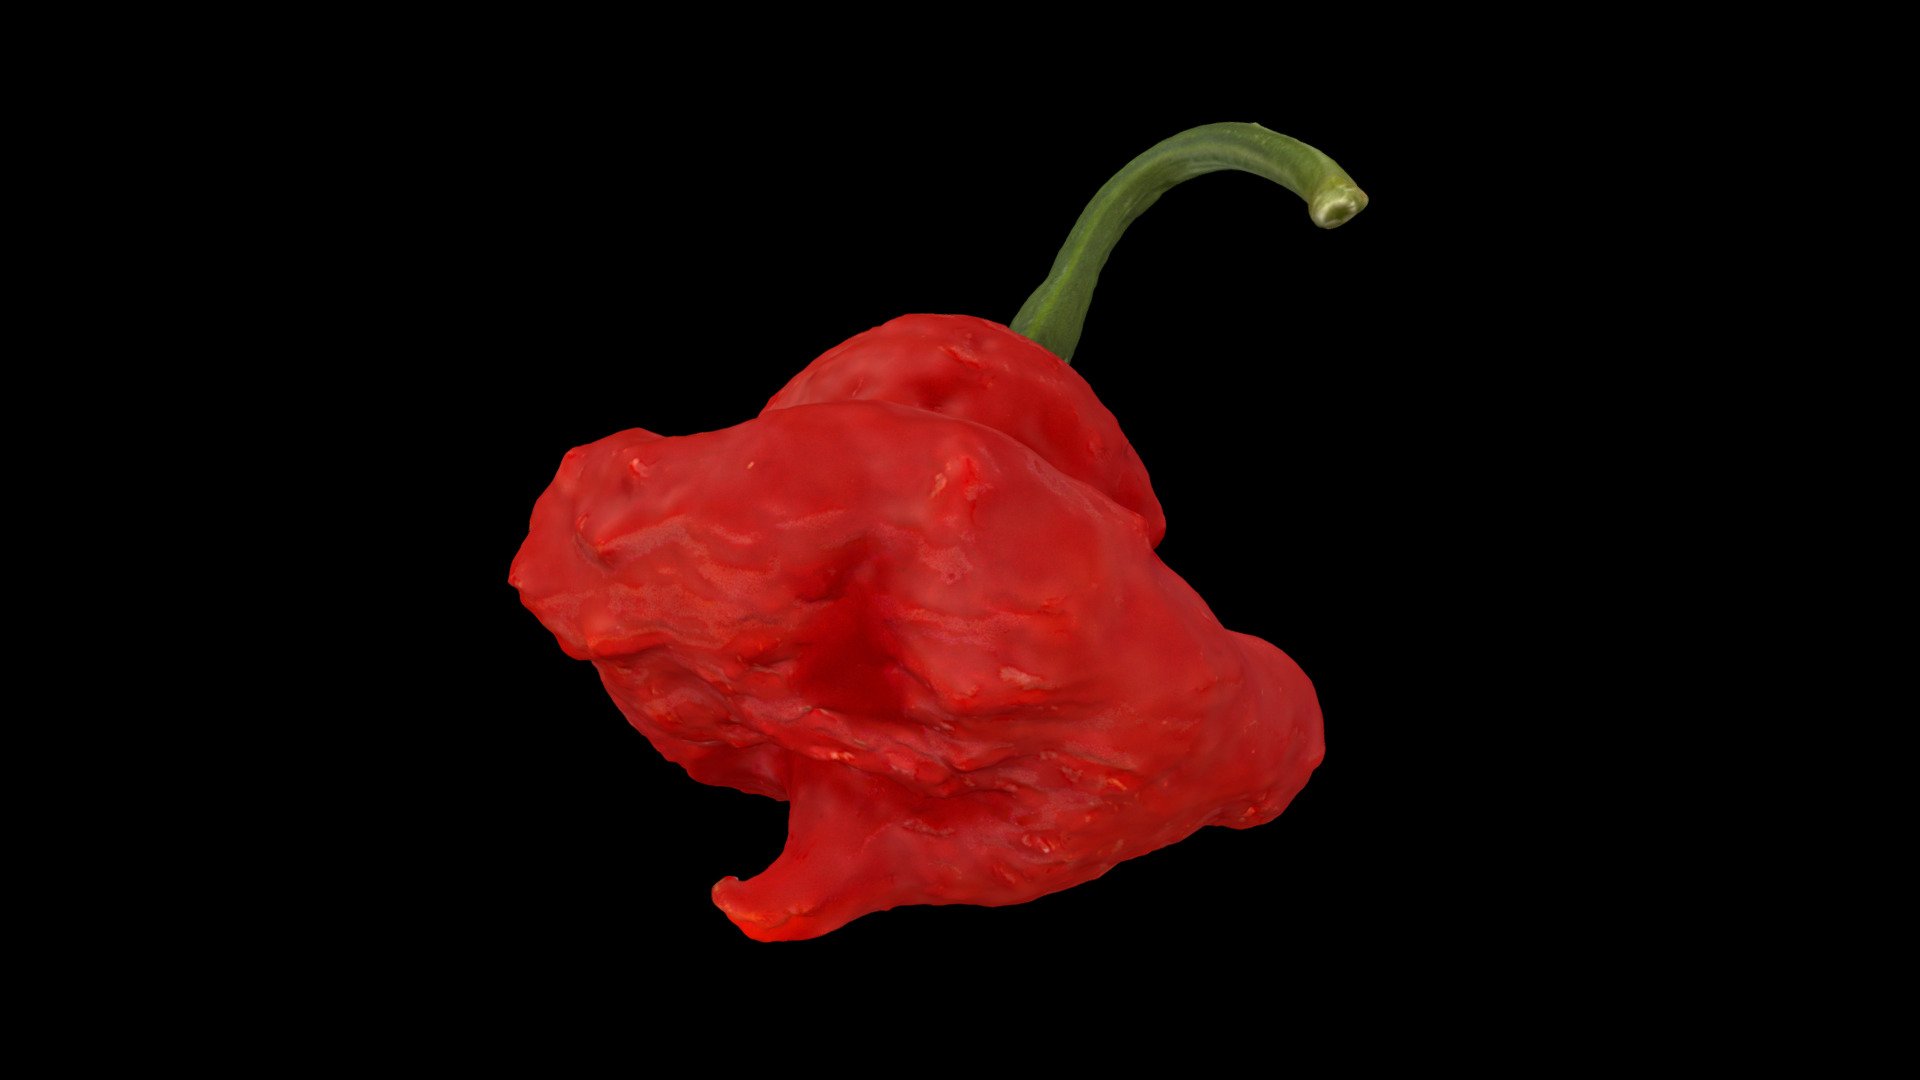 The first ripe Scarlet Rose (KSSR) pepper of my 2023 season.

Digitized with a turntable workflow; Sony a6000, 55mm lens, Agisoft metashape.

The Scarlet Rose is a cross (hybrid) between the MOA scotch bonnet and Bahamian Goat chili peppers. It is a hot pepper, with heat comparable to a habanero 3d model